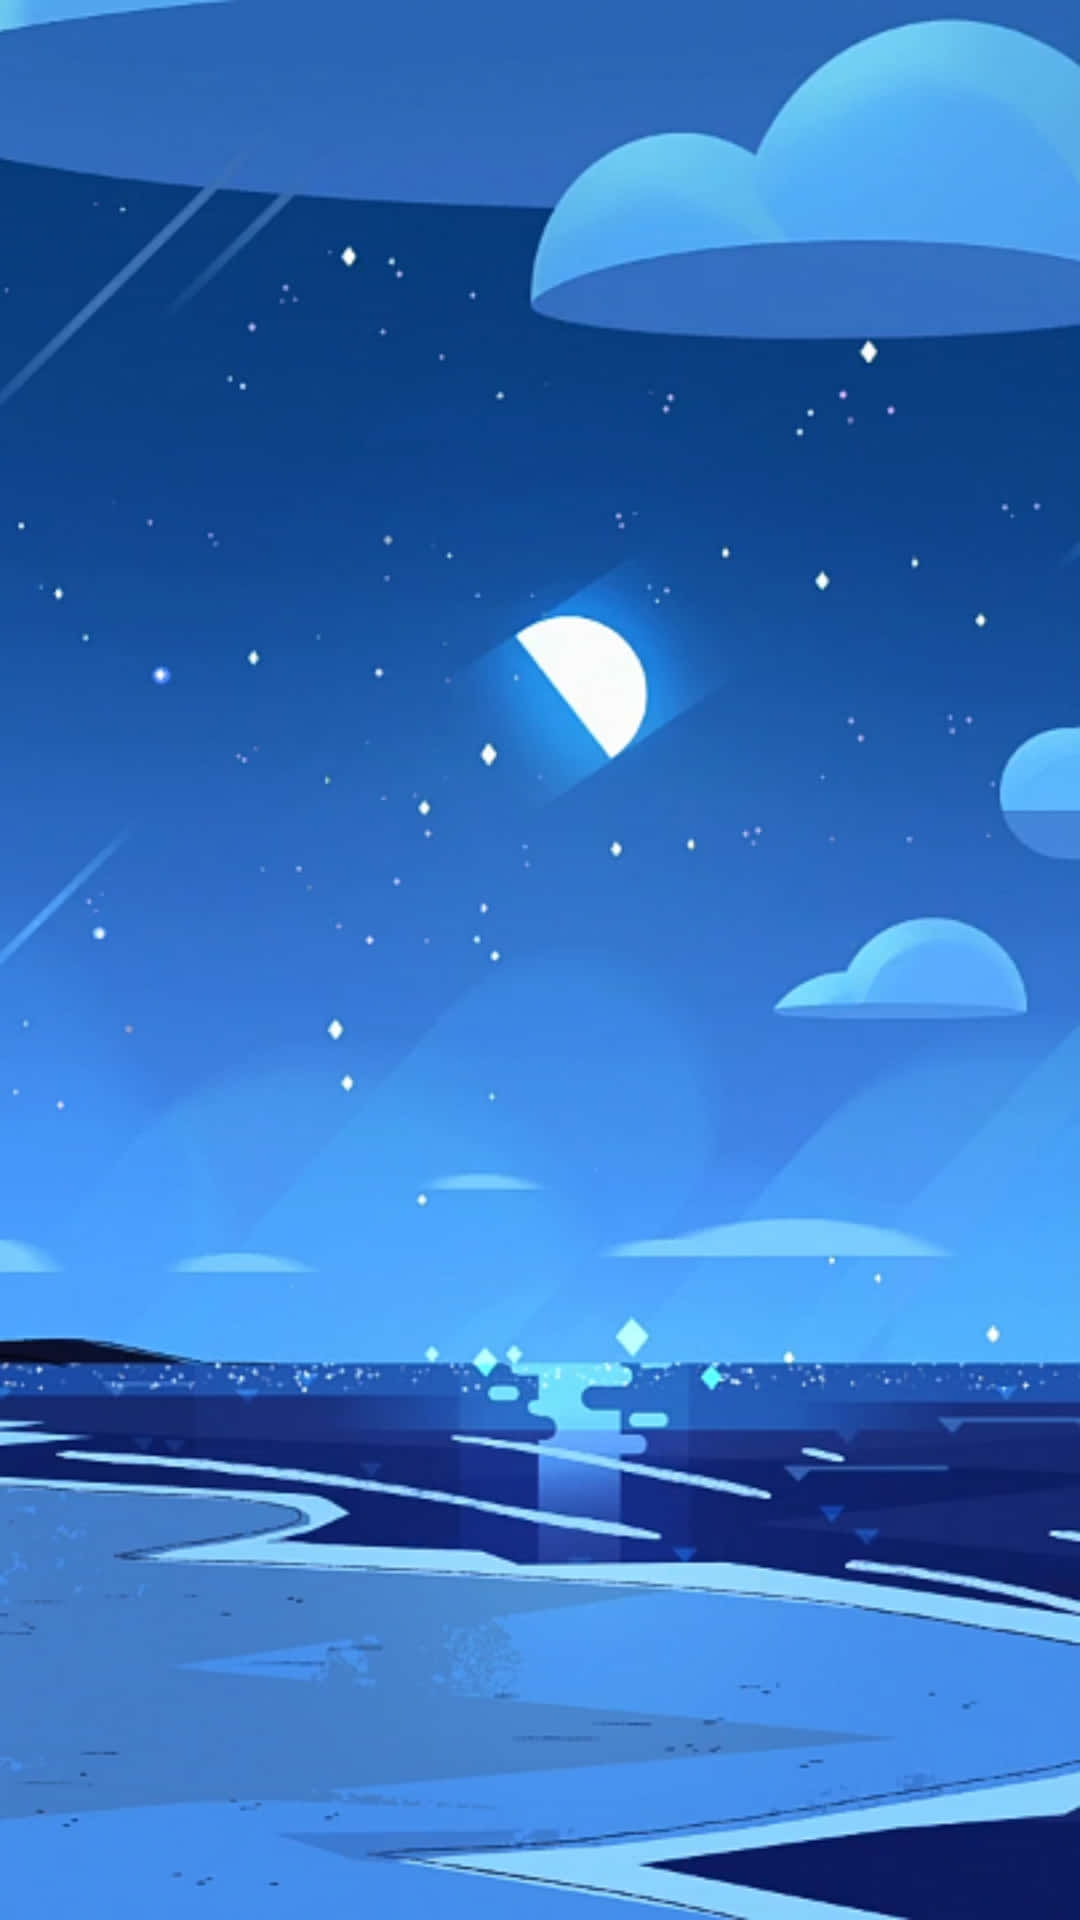 140 Steven Universe HD Wallpapers and Backgrounds